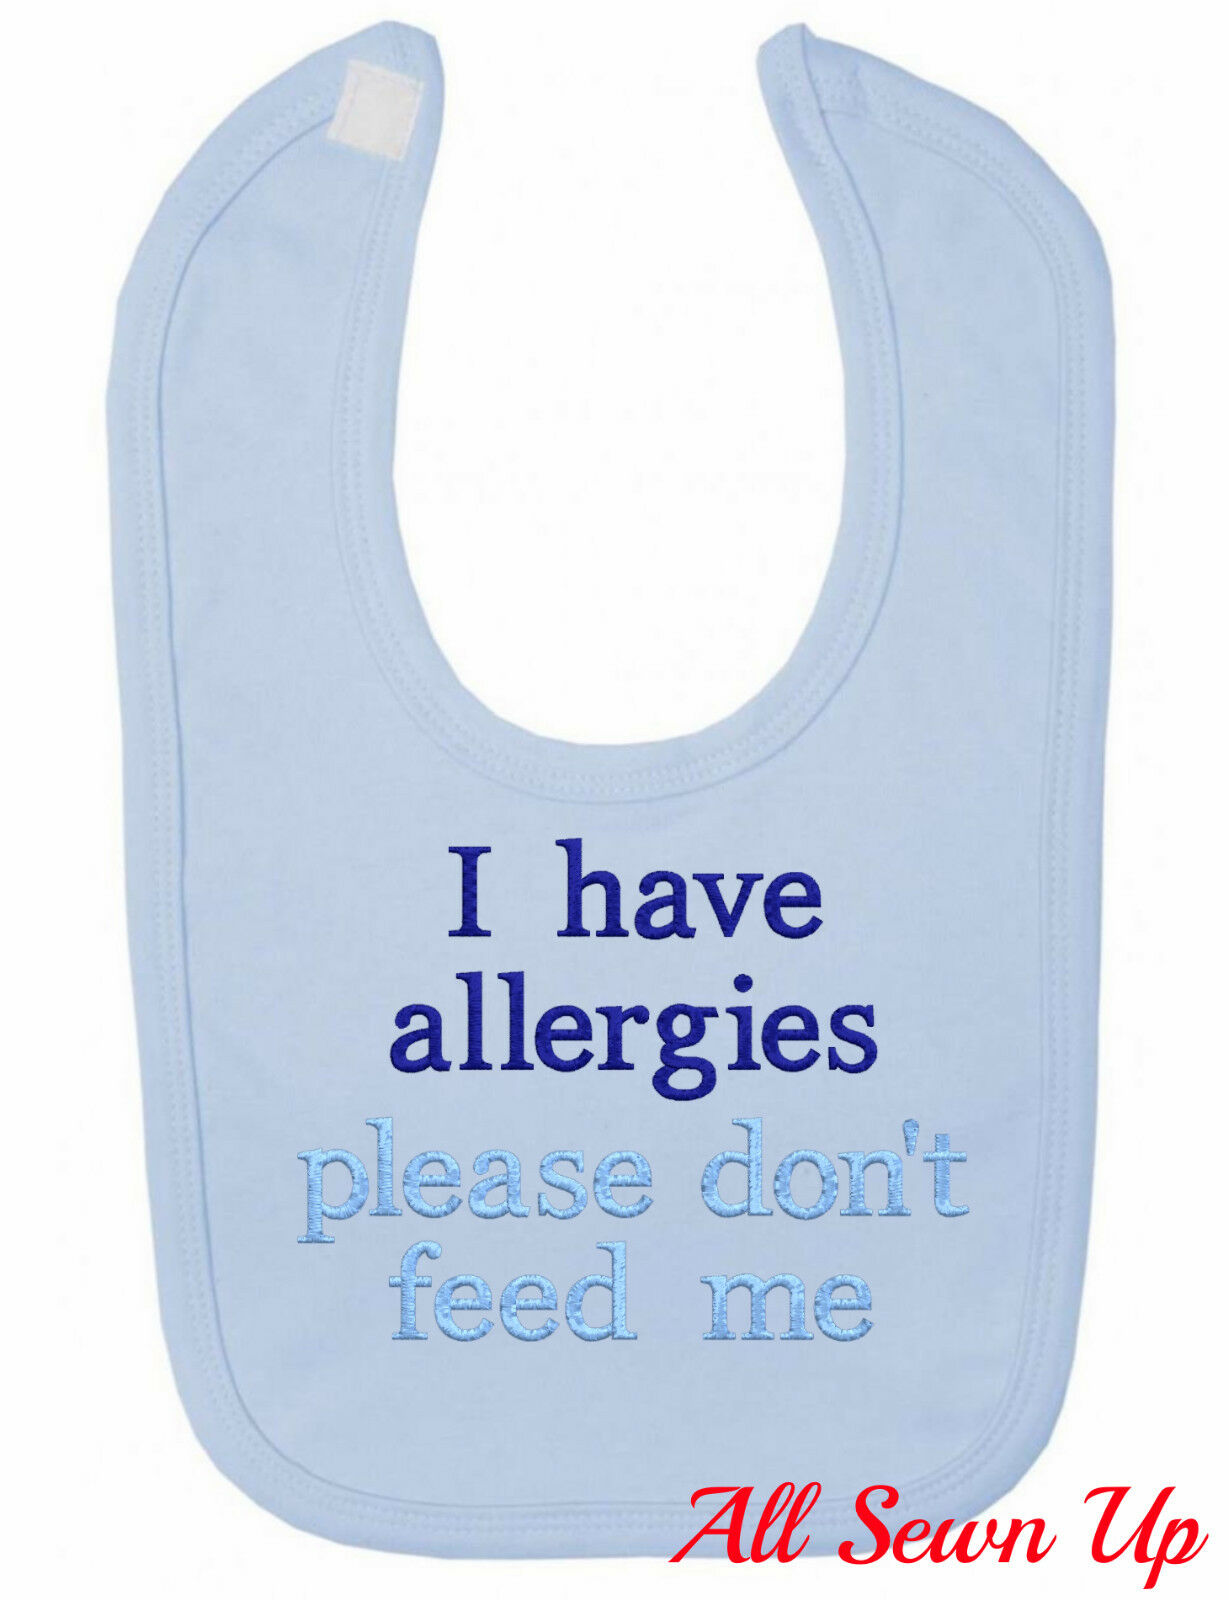 Personalised / Embroidered Allergy Bib: "I have allergies"